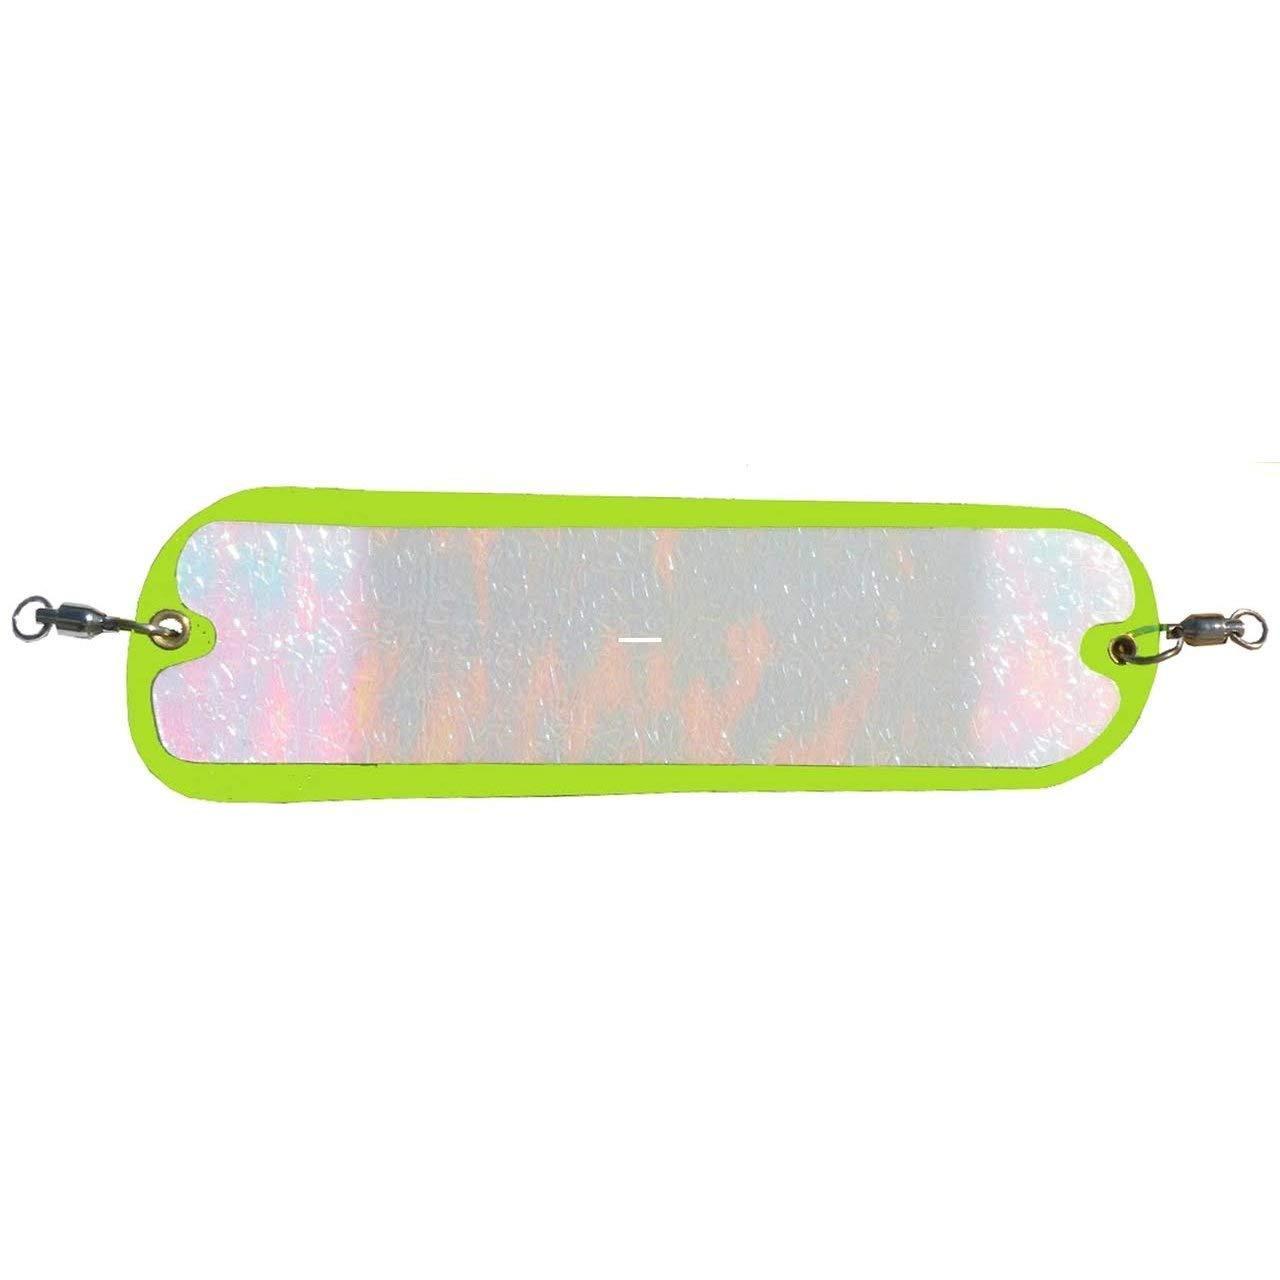 Pro-Troll Pro-Chip Flasher, 8-Inch, Glow Chartreuse